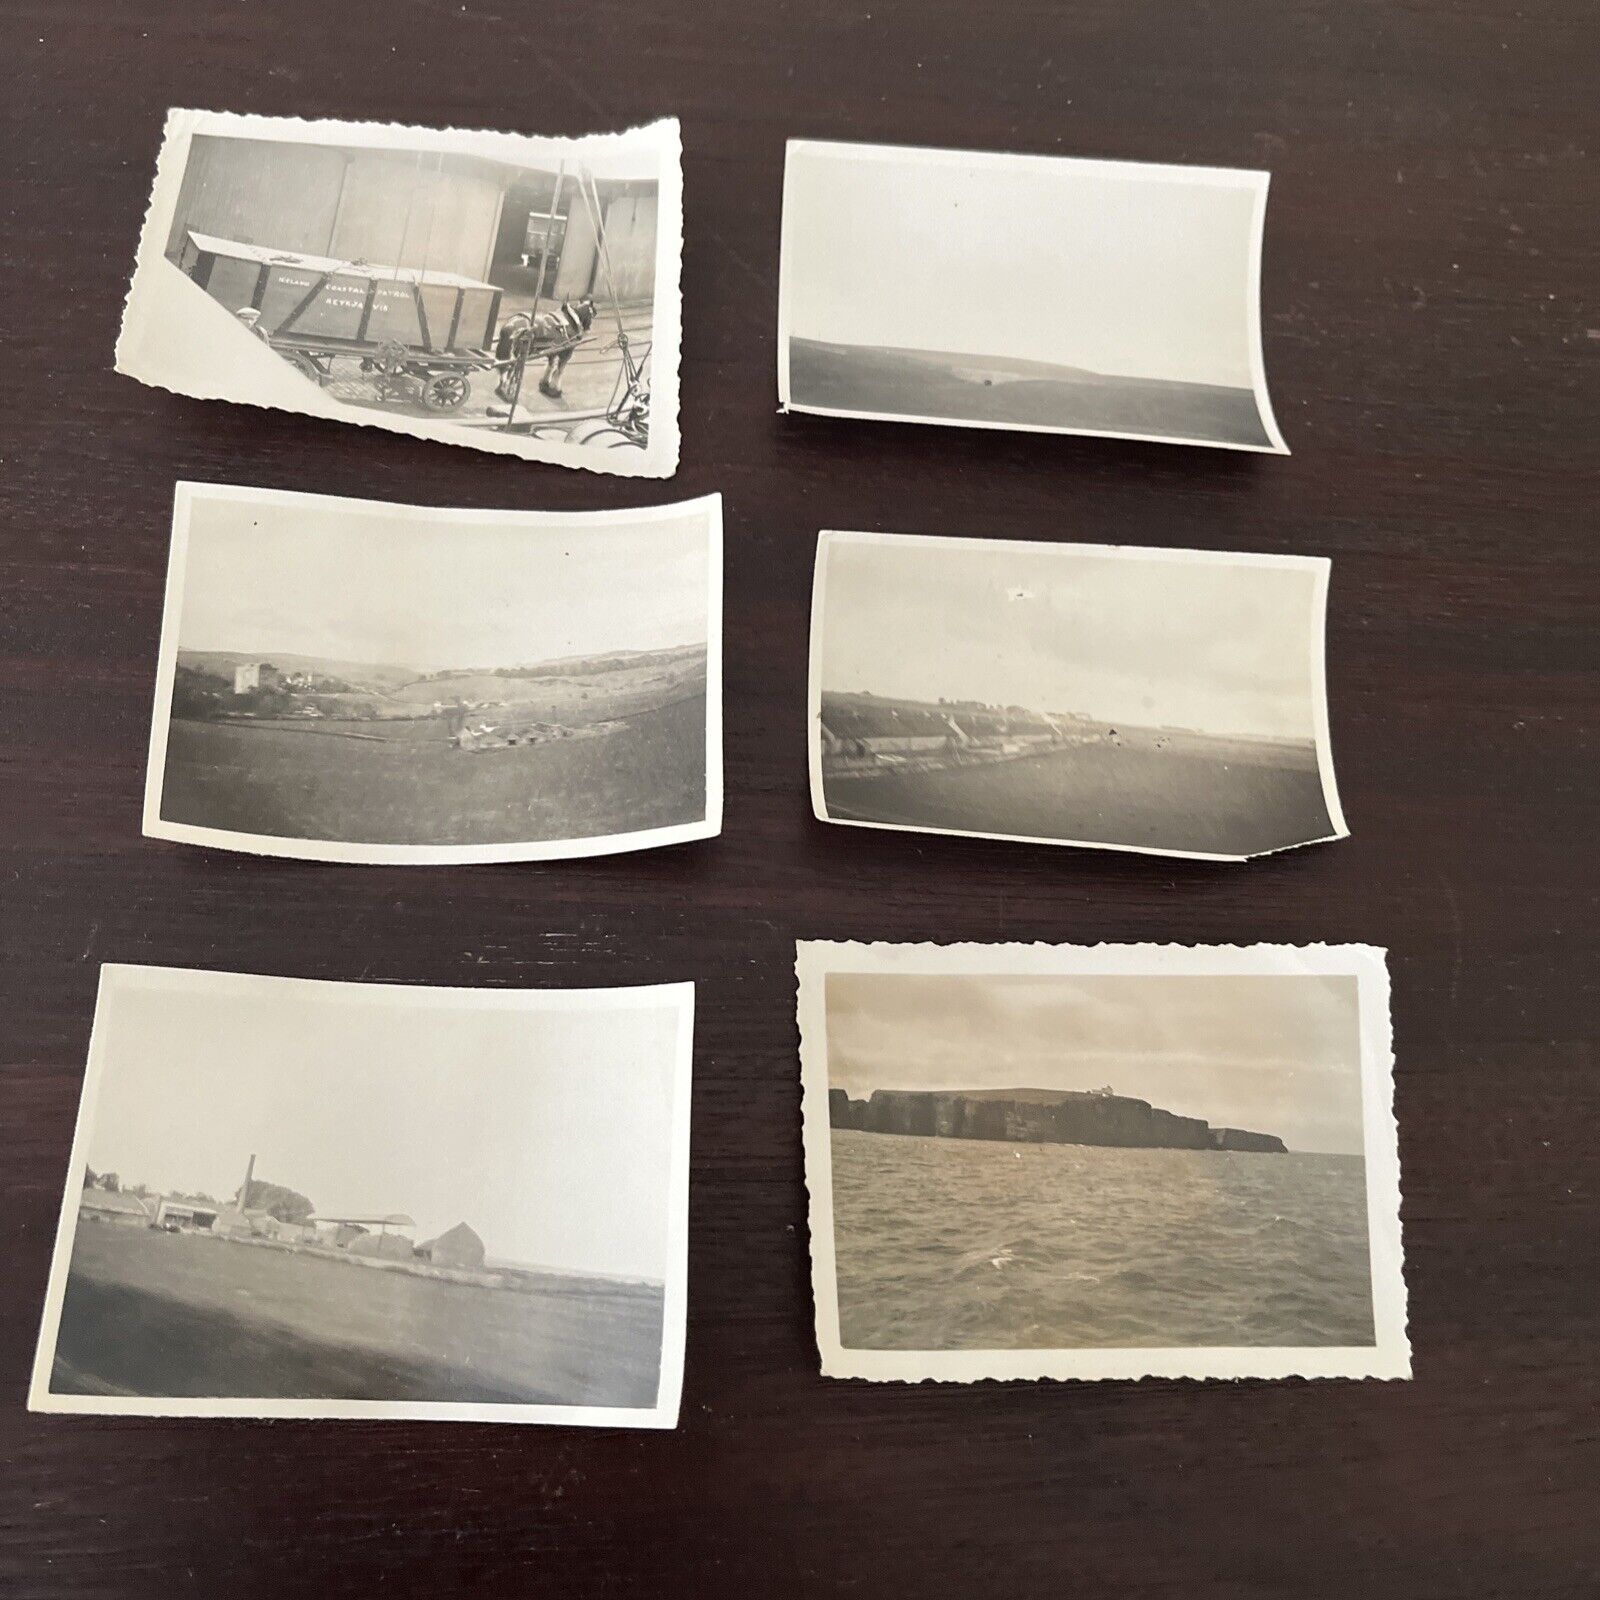 Vtg 1930s 6 Photos Labeled “from Train, Scotland” And Aboard Gulfoss